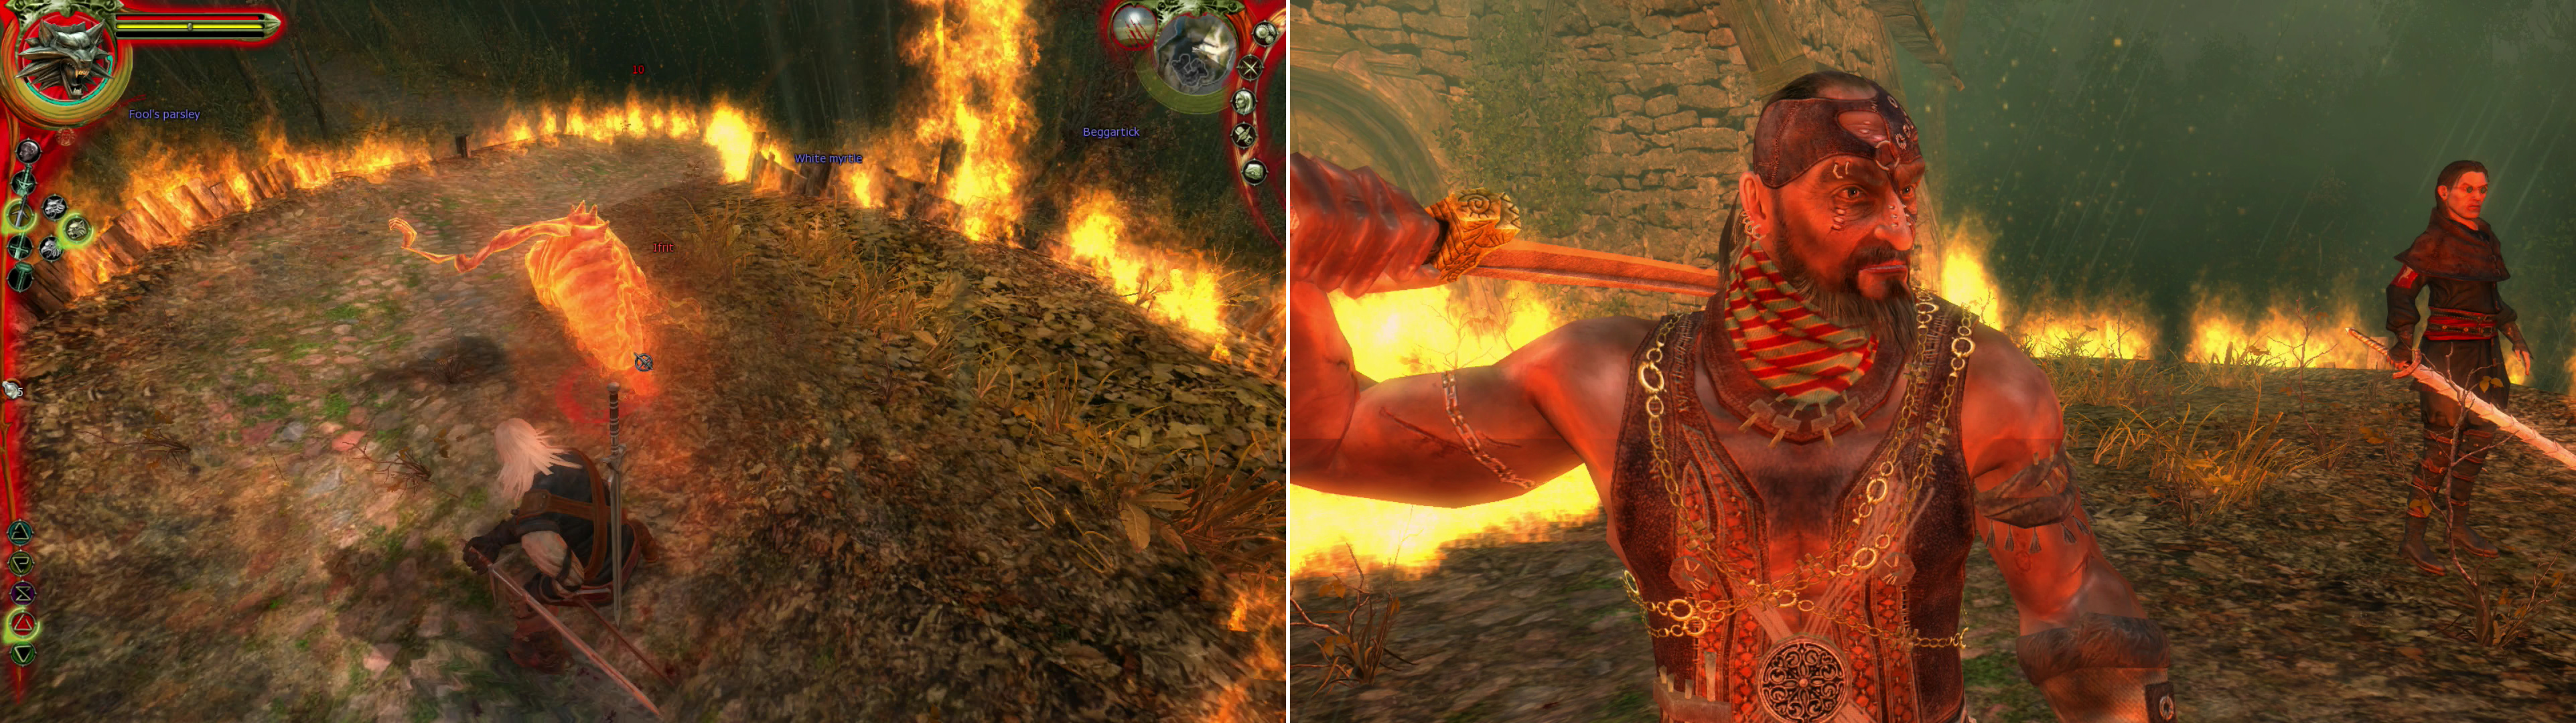 After getting the drop on Azar, he’ll summon an Ifrit (left). This is merely a delay, however, buying him time until he can create a portal through which the Professor joins the fray (right).